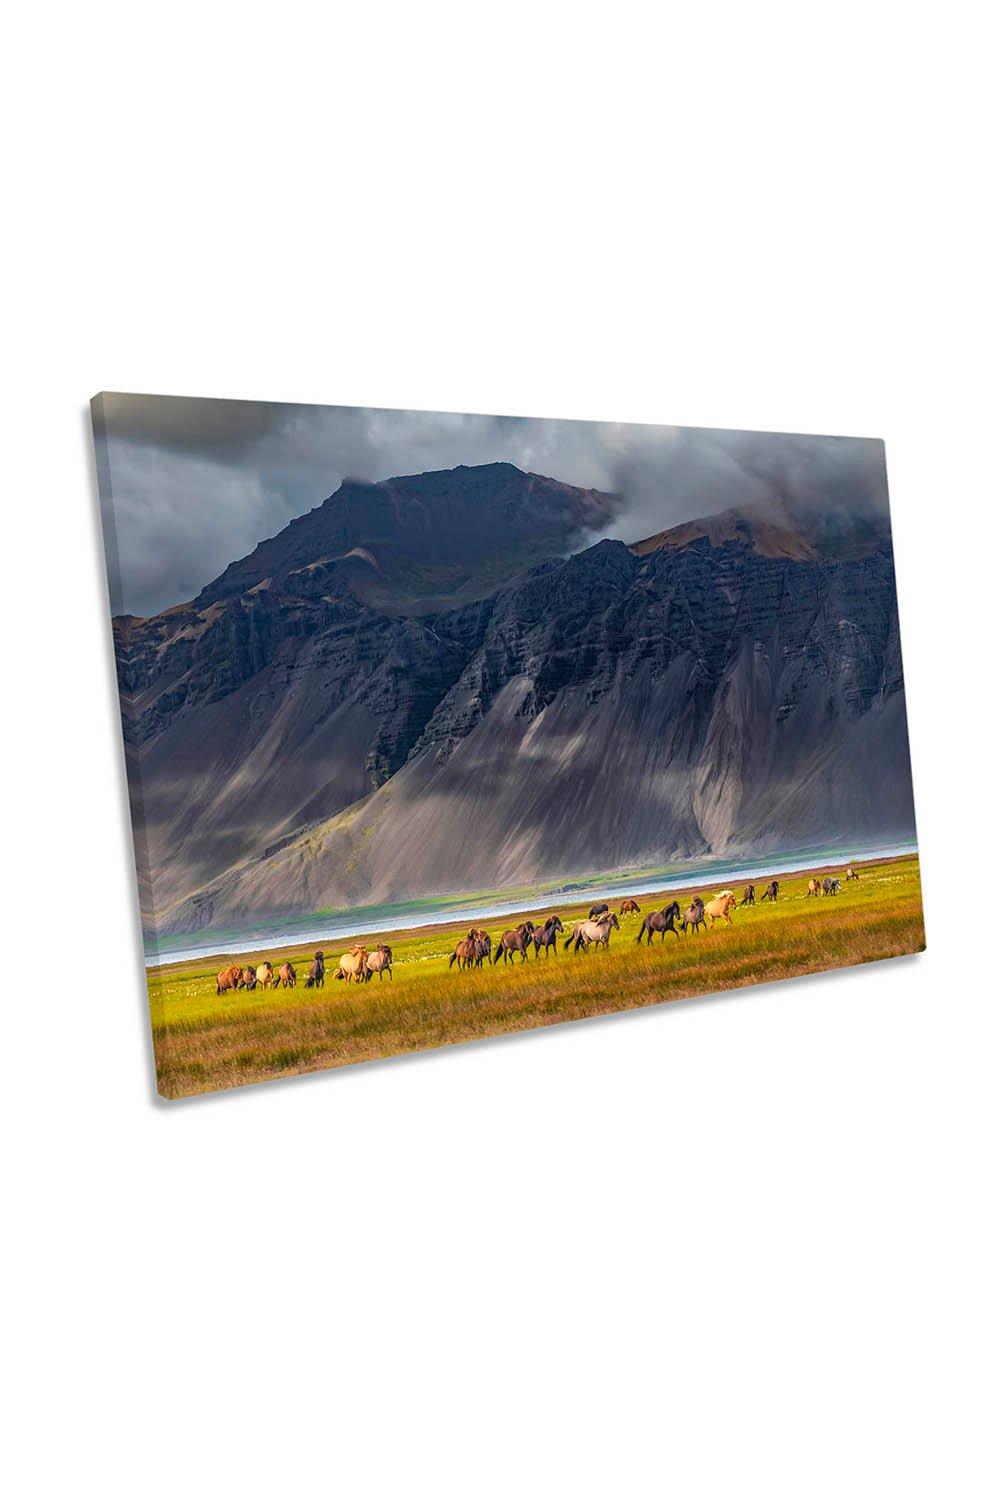 Freedom Horses Mountain Landscape Canvas Wall Art Picture Print